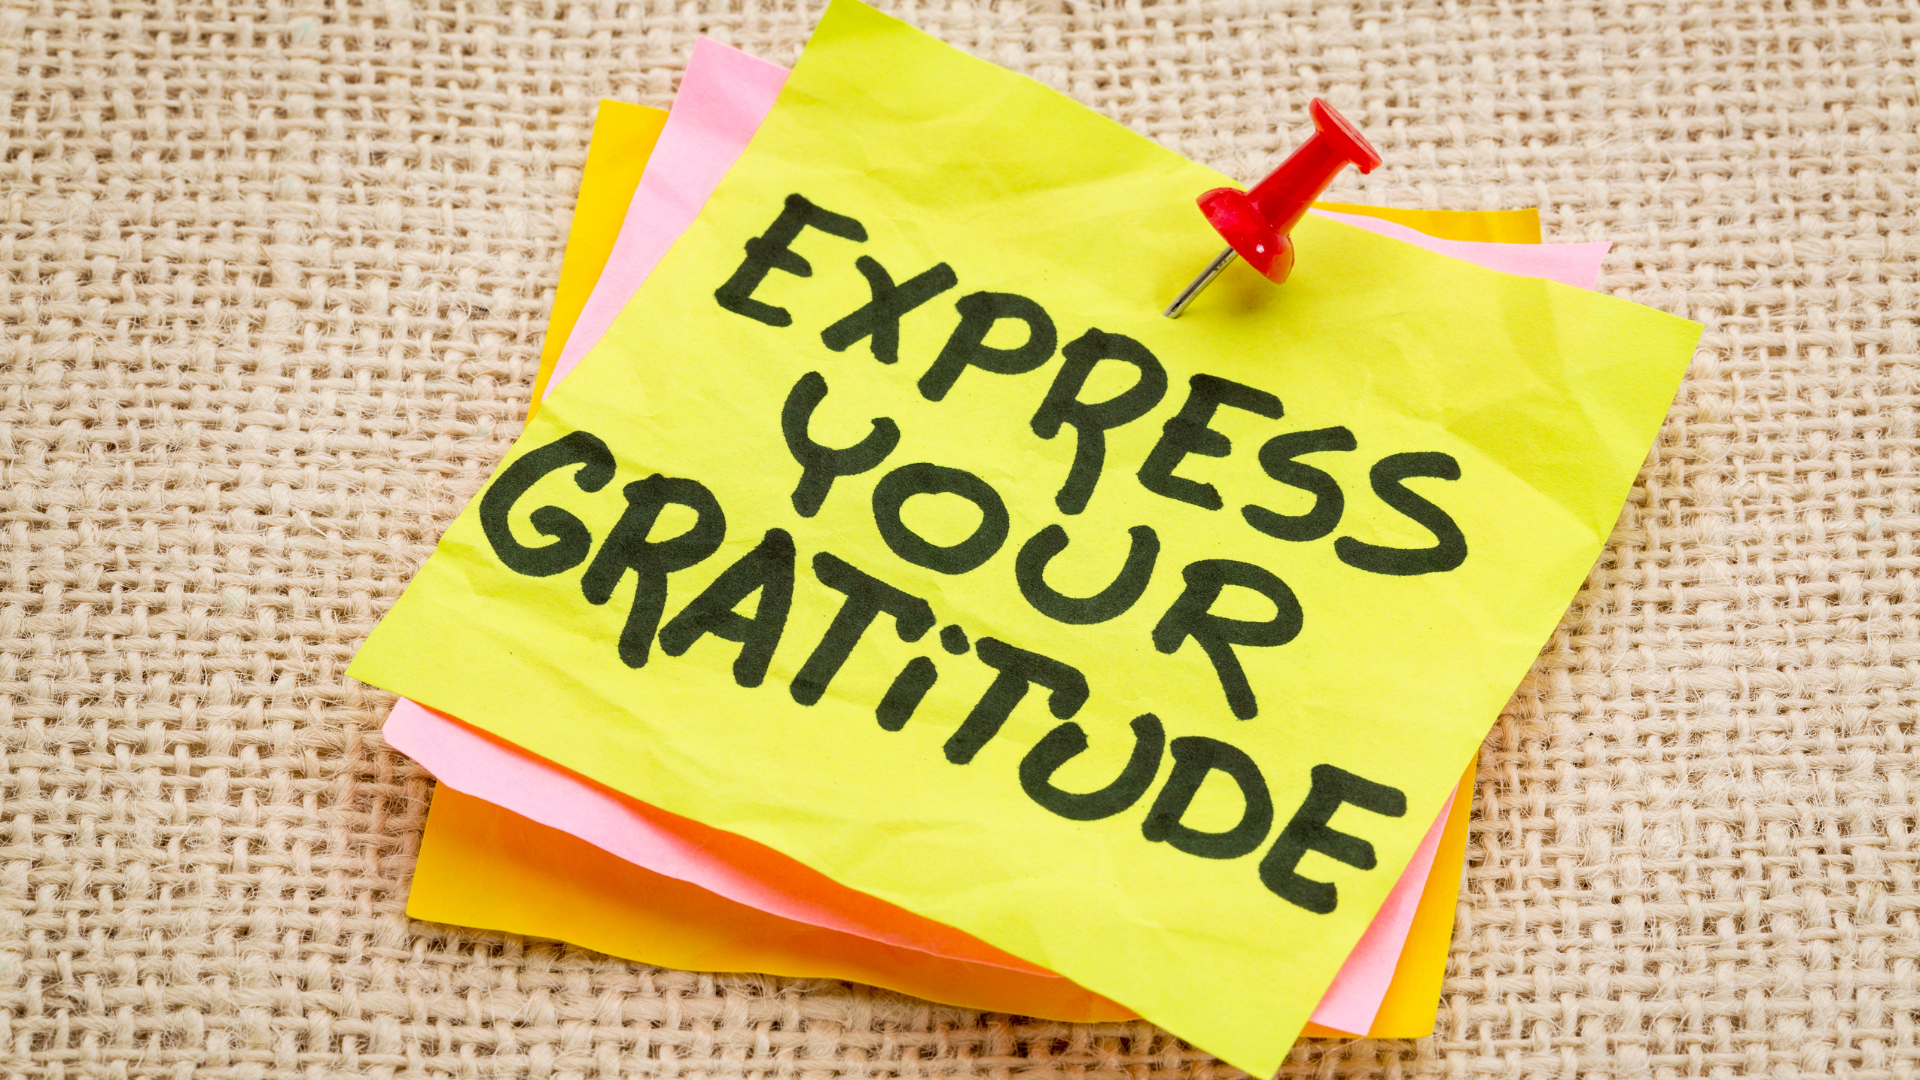 Gratitude is a powerful tool that can help us overcome life's challenges. It's not always easy, but it's possible.